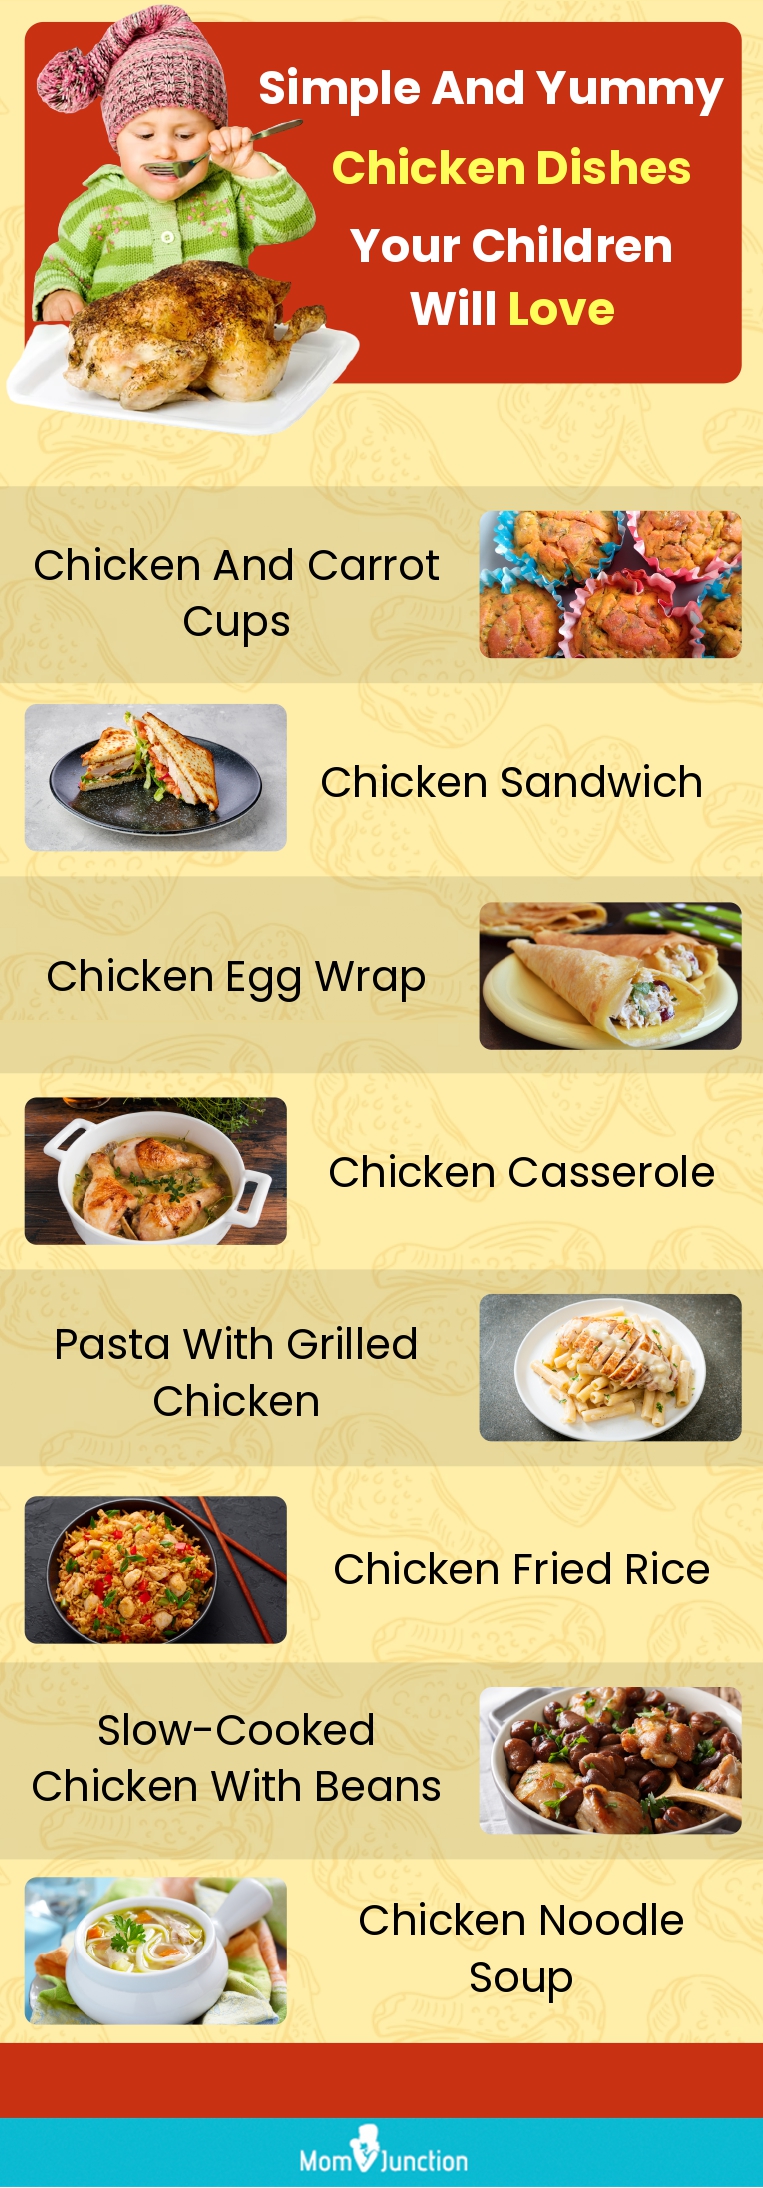  simple and yummy chicken dishes your children will love (infographic)